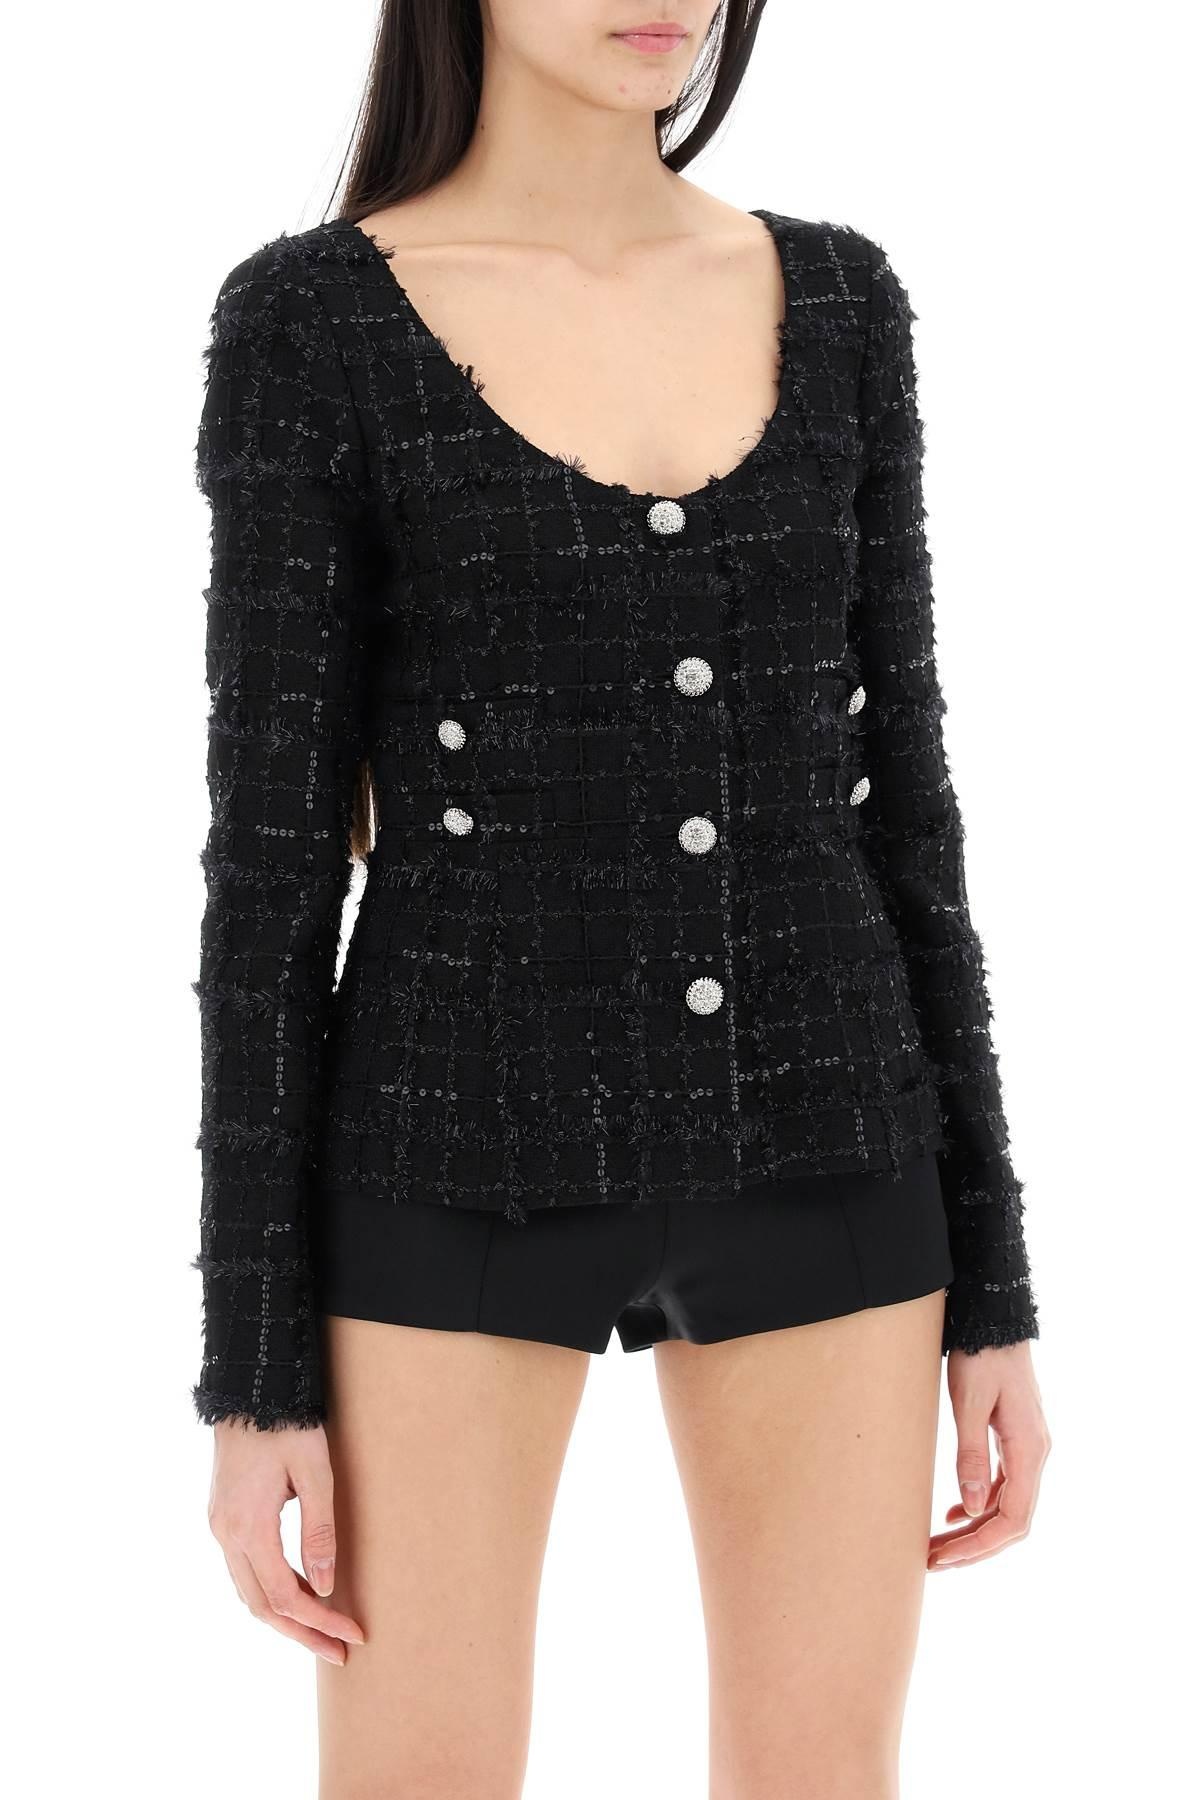 Alessandra Rich Tweed Jacket With Sequins Embell - 3